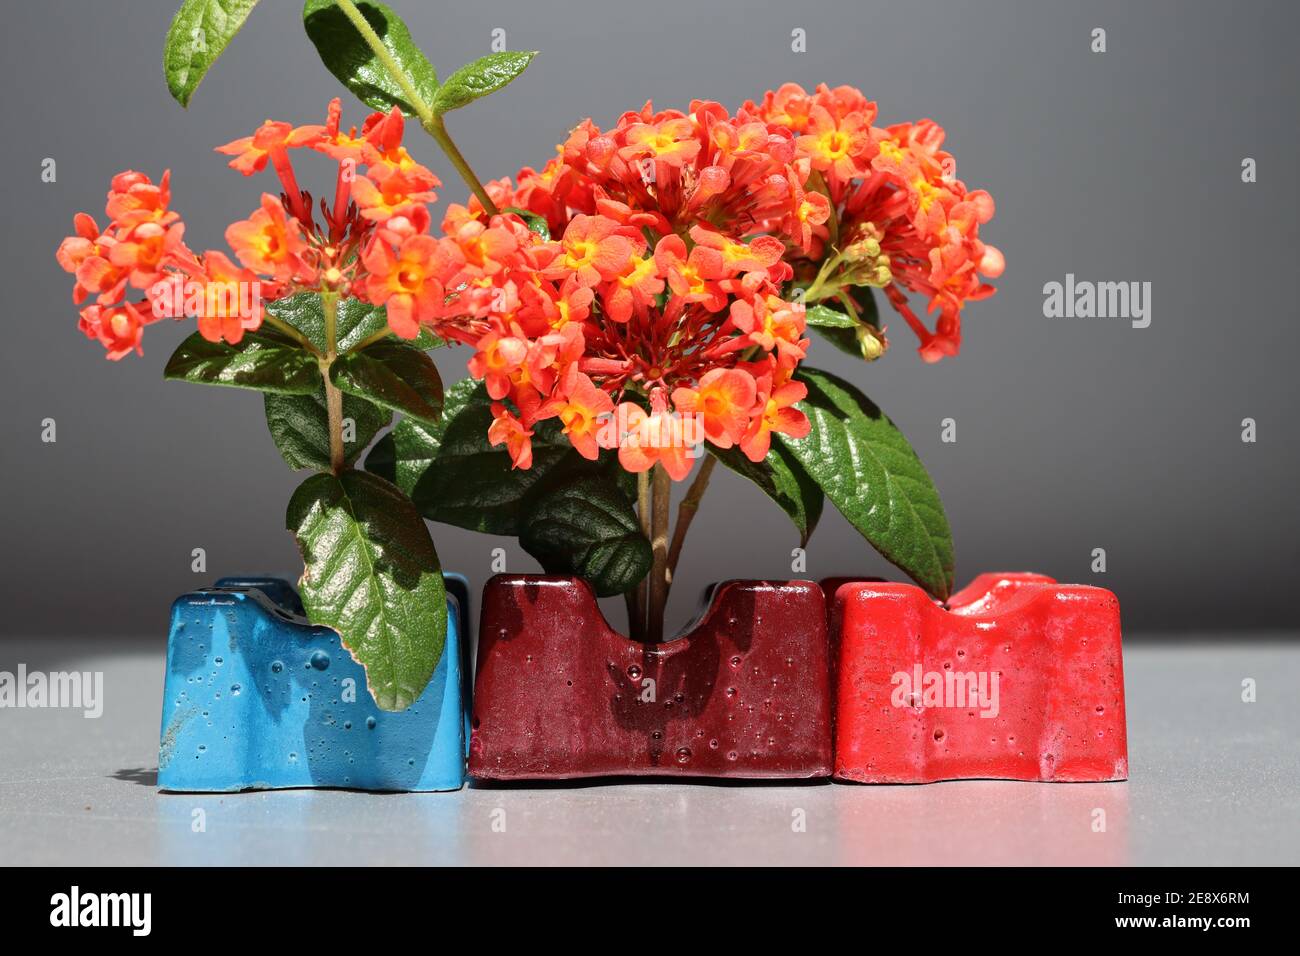 Beautiful red flowers with tiny petals gathering together in an artificial environment. Stock Photo